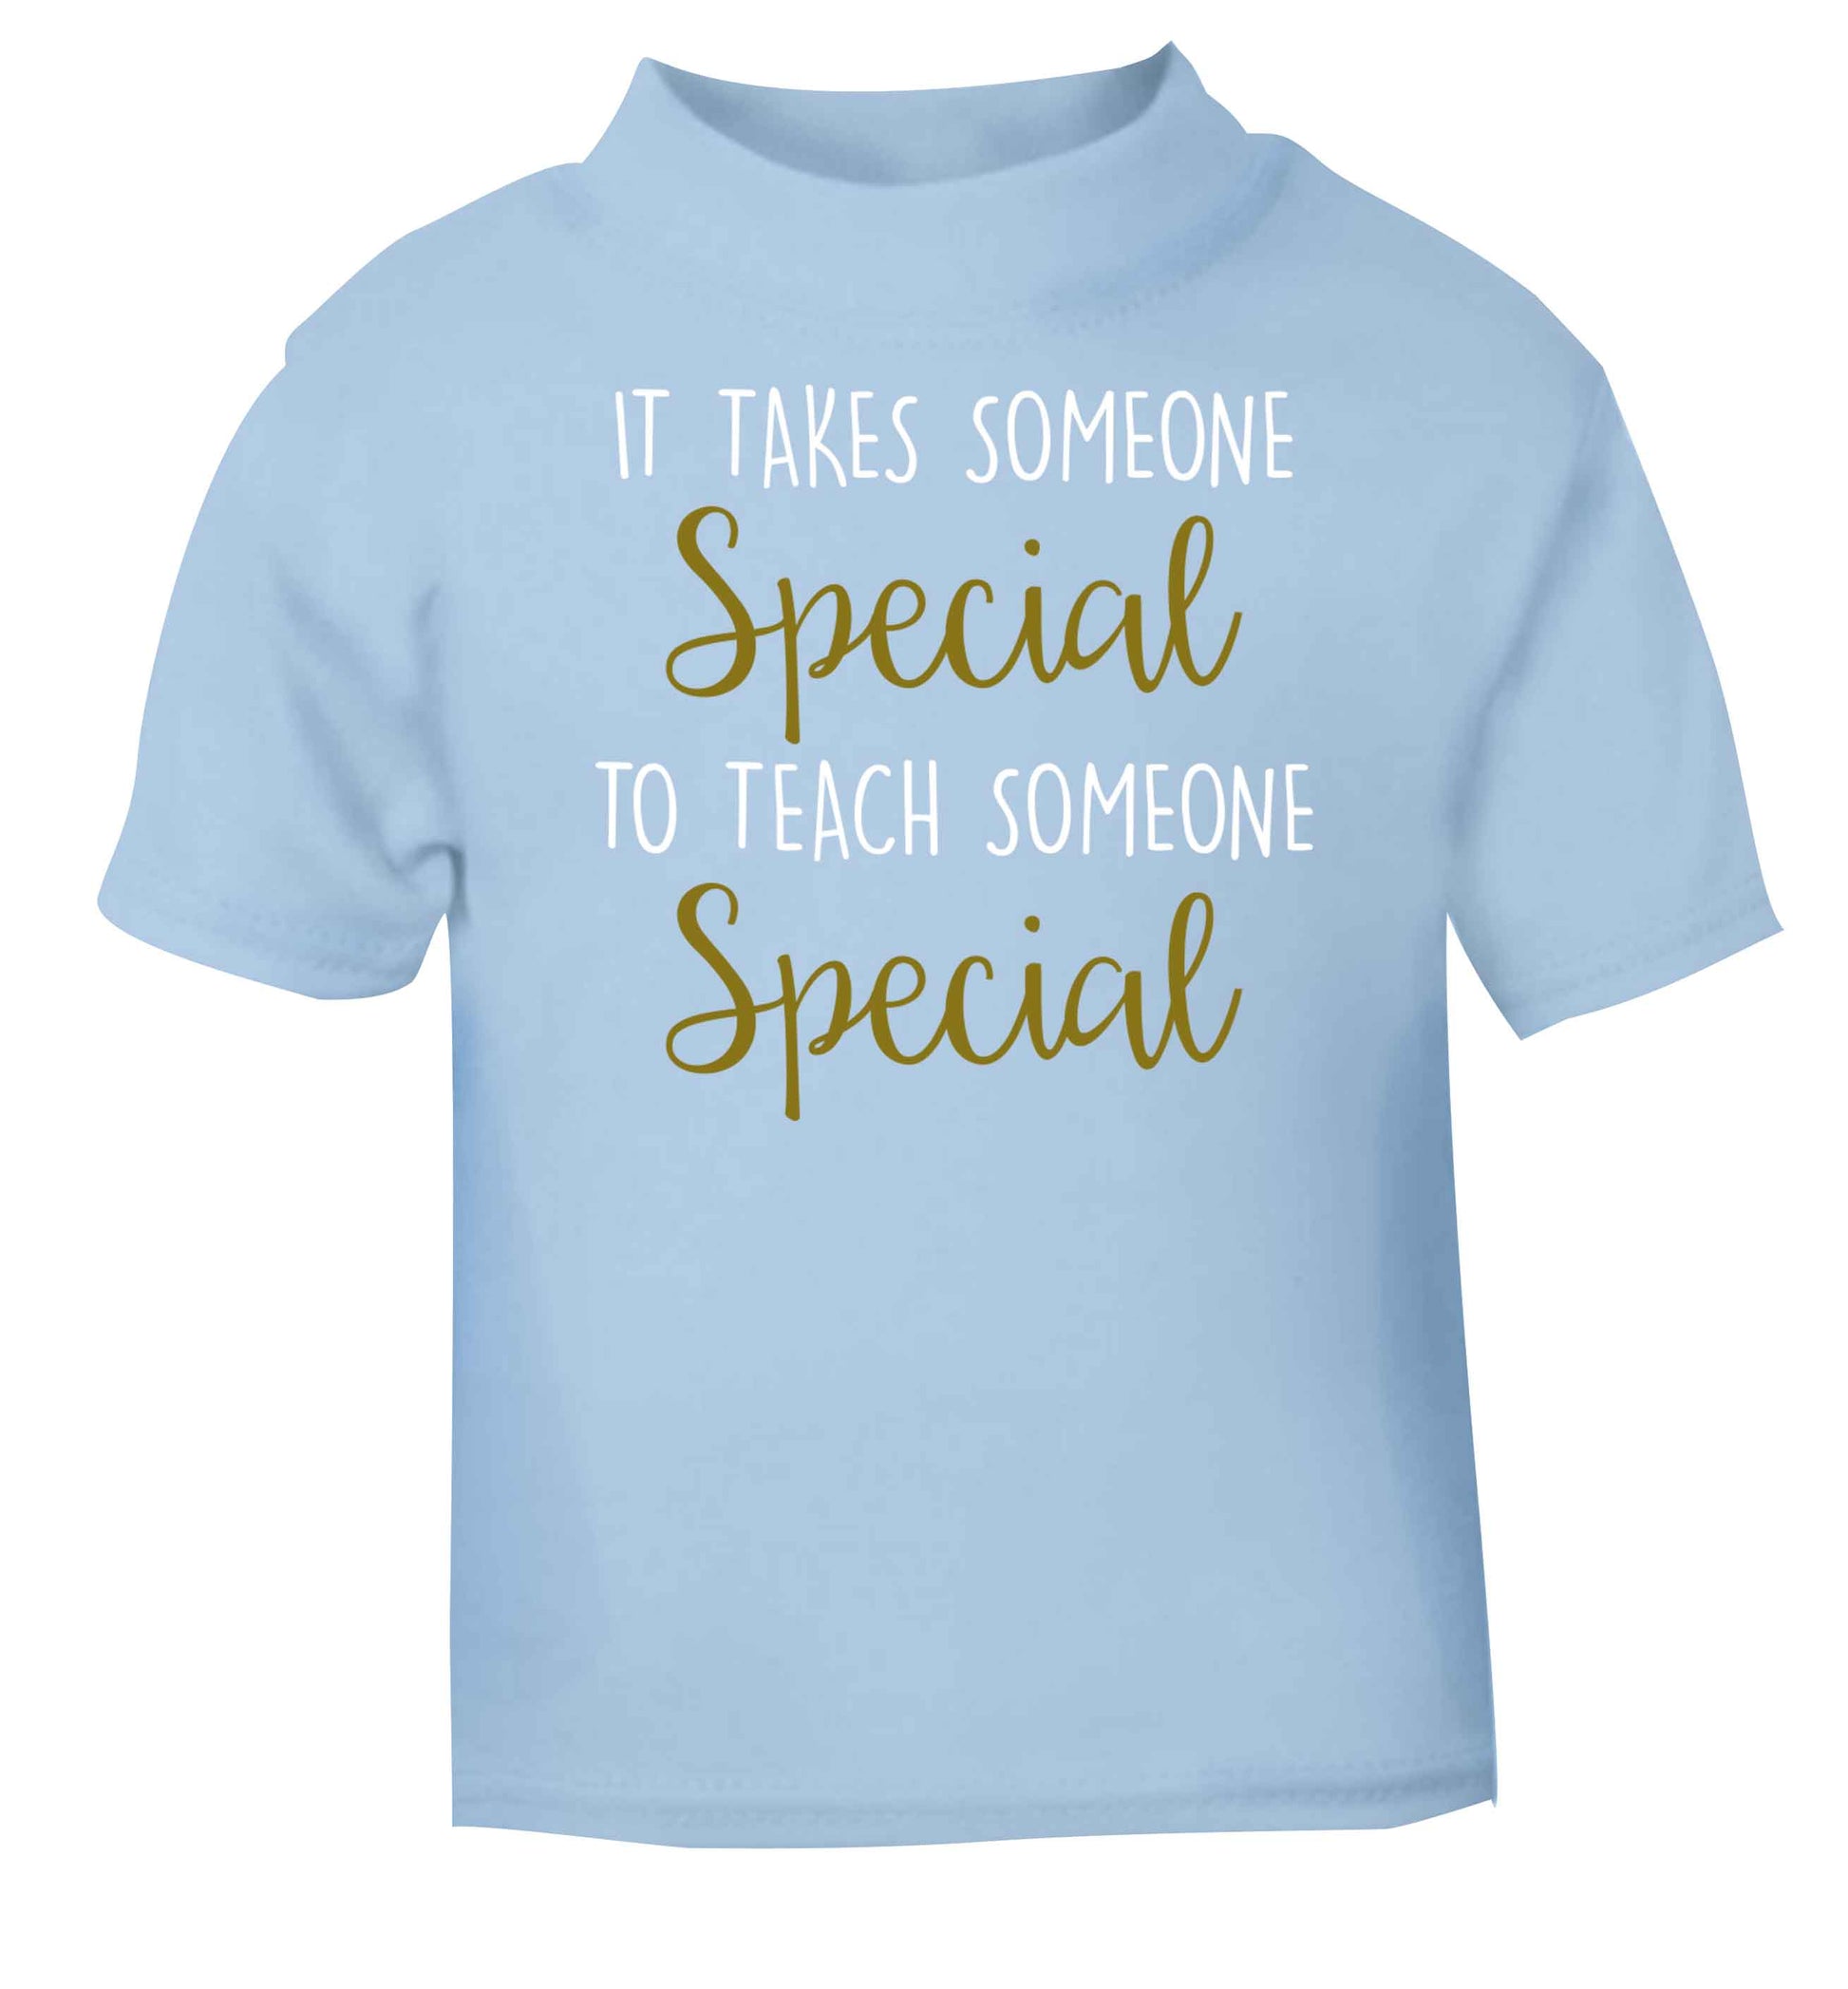 It takes someone special to teach someone special light blue baby toddler Tshirt 2 Years